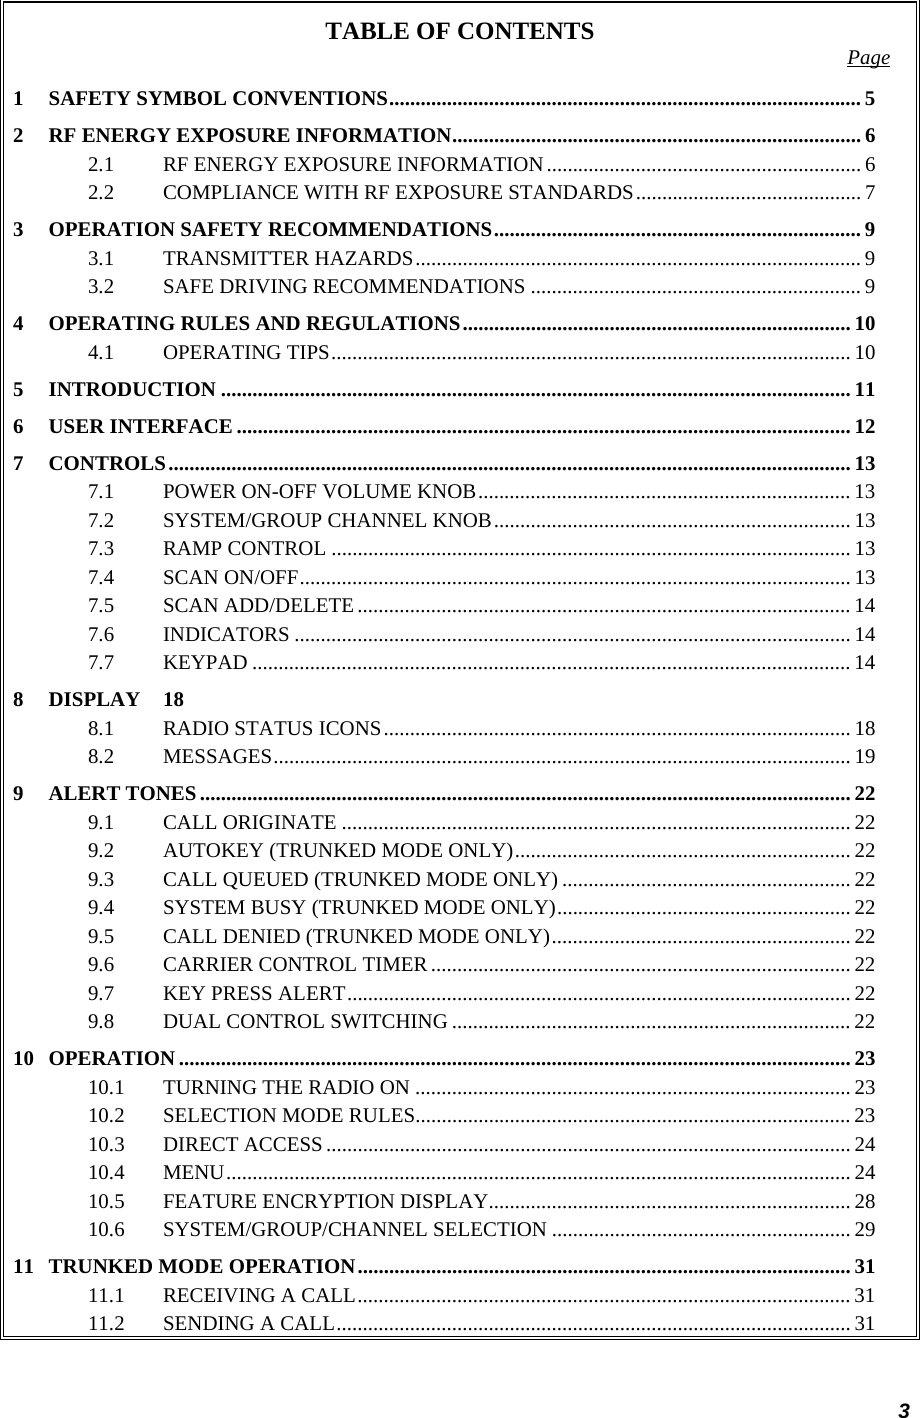 3 TABLE OF CONTENTS  Page 1 SAFETY SYMBOL CONVENTIONS.......................................................................................... 5 2 RF ENERGY EXPOSURE INFORMATION.............................................................................. 6 2.1 RF ENERGY EXPOSURE INFORMATION............................................................ 6 2.2 COMPLIANCE WITH RF EXPOSURE STANDARDS........................................... 7 3 OPERATION SAFETY RECOMMENDATIONS...................................................................... 9 3.1 TRANSMITTER HAZARDS..................................................................................... 9 3.2 SAFE DRIVING RECOMMENDATIONS ............................................................... 9 4 OPERATING RULES AND REGULATIONS.......................................................................... 10 4.1 OPERATING TIPS................................................................................................... 10 5 INTRODUCTION ........................................................................................................................ 11 6 USER INTERFACE ..................................................................................................................... 12 7 CONTROLS.................................................................................................................................. 13 7.1 POWER ON-OFF VOLUME KNOB....................................................................... 13 7.2 SYSTEM/GROUP CHANNEL KNOB.................................................................... 13 7.3 RAMP CONTROL ................................................................................................... 13 7.4 SCAN ON/OFF......................................................................................................... 13 7.5 SCAN ADD/DELETE .............................................................................................. 14 7.6 INDICATORS .......................................................................................................... 14 7.7 KEYPAD .................................................................................................................. 14 8 DISPLAY 18 8.1 RADIO STATUS ICONS......................................................................................... 18 8.2 MESSAGES.............................................................................................................. 19 9 ALERT TONES............................................................................................................................ 22 9.1 CALL ORIGINATE ................................................................................................. 22 9.2 AUTOKEY (TRUNKED MODE ONLY)................................................................ 22 9.3 CALL QUEUED (TRUNKED MODE ONLY) ....................................................... 22 9.4 SYSTEM BUSY (TRUNKED MODE ONLY)........................................................ 22 9.5 CALL DENIED (TRUNKED MODE ONLY)......................................................... 22 9.6 CARRIER CONTROL TIMER ................................................................................ 22 9.7 KEY PRESS ALERT................................................................................................ 22 9.8 DUAL CONTROL SWITCHING ............................................................................ 22 10 OPERATION ................................................................................................................................ 23 10.1 TURNING THE RADIO ON ................................................................................... 23 10.2 SELECTION MODE RULES................................................................................... 23 10.3 DIRECT ACCESS .................................................................................................... 24 10.4 MENU....................................................................................................................... 24 10.5 FEATURE ENCRYPTION DISPLAY..................................................................... 28 10.6 SYSTEM/GROUP/CHANNEL SELECTION ......................................................... 29 11 TRUNKED MODE OPERATION.............................................................................................. 31 11.1 RECEIVING A CALL.............................................................................................. 31 11.2 SENDING A CALL.................................................................................................. 31 